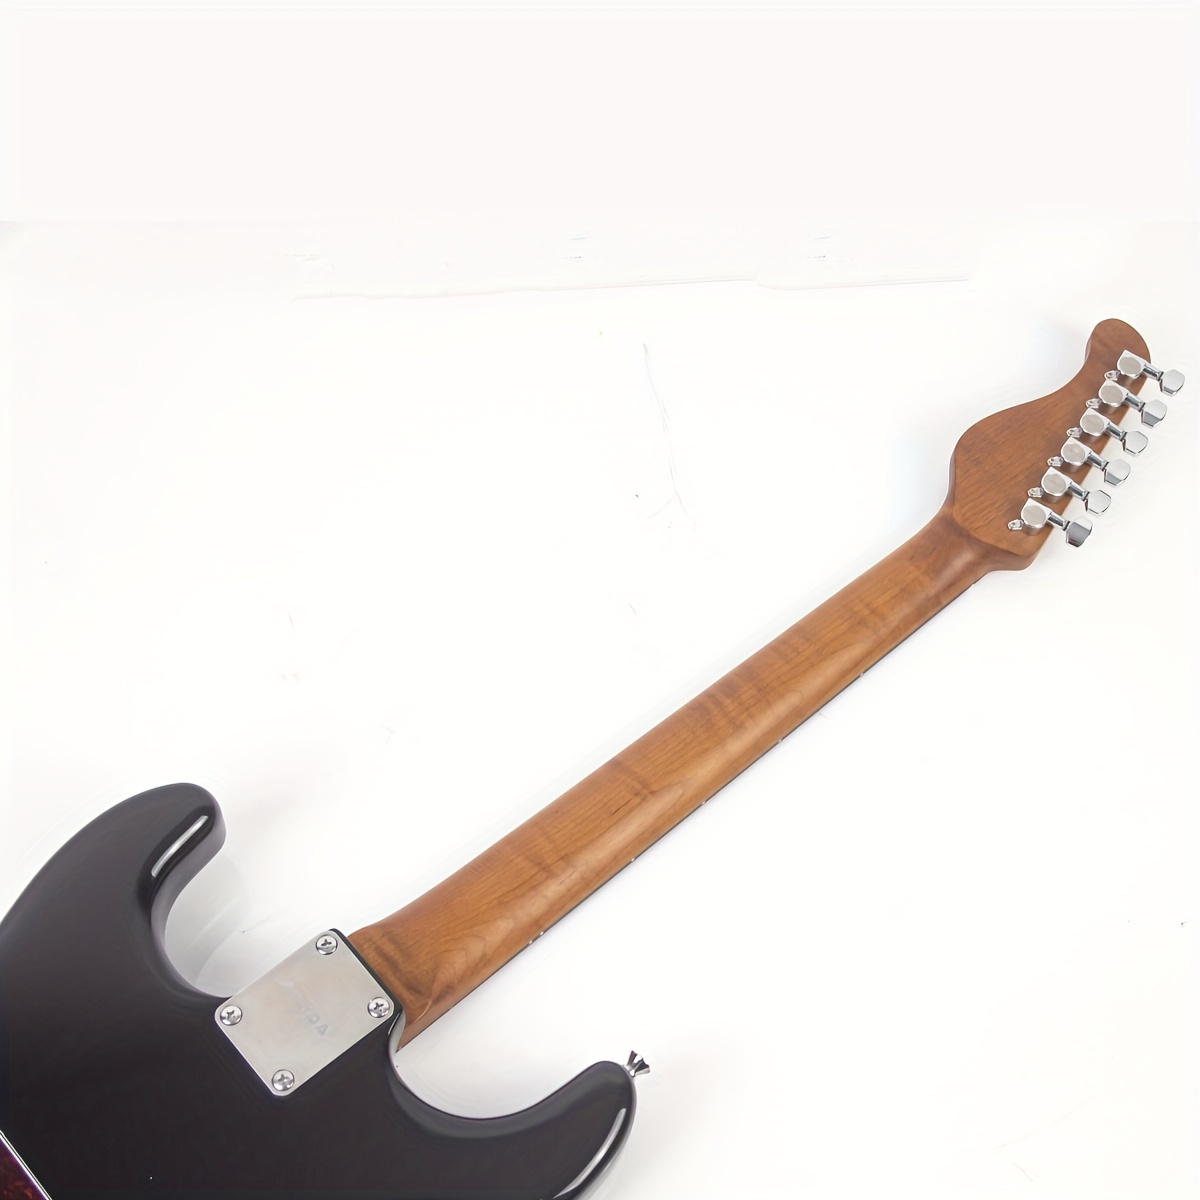 adult professional beginner solid color electric guitar smooth feel single pendulum st electric guitar set comes with a free electric guitar storage bag